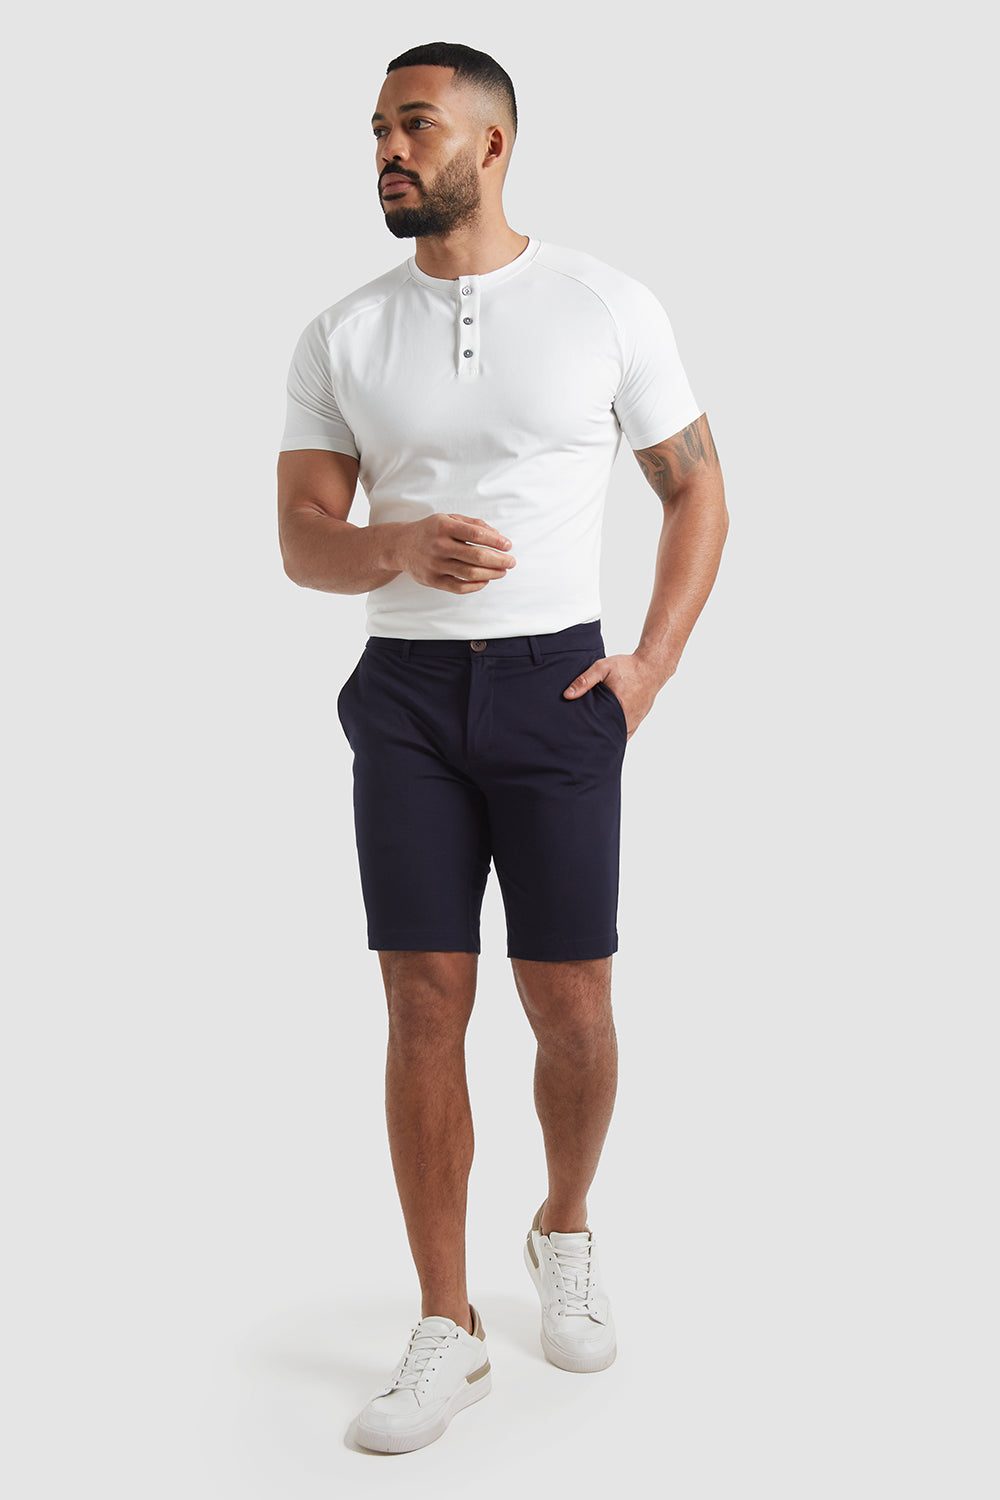 Athletic Fit Chino Shorts in Sand - TAILORED ATHLETE - USA